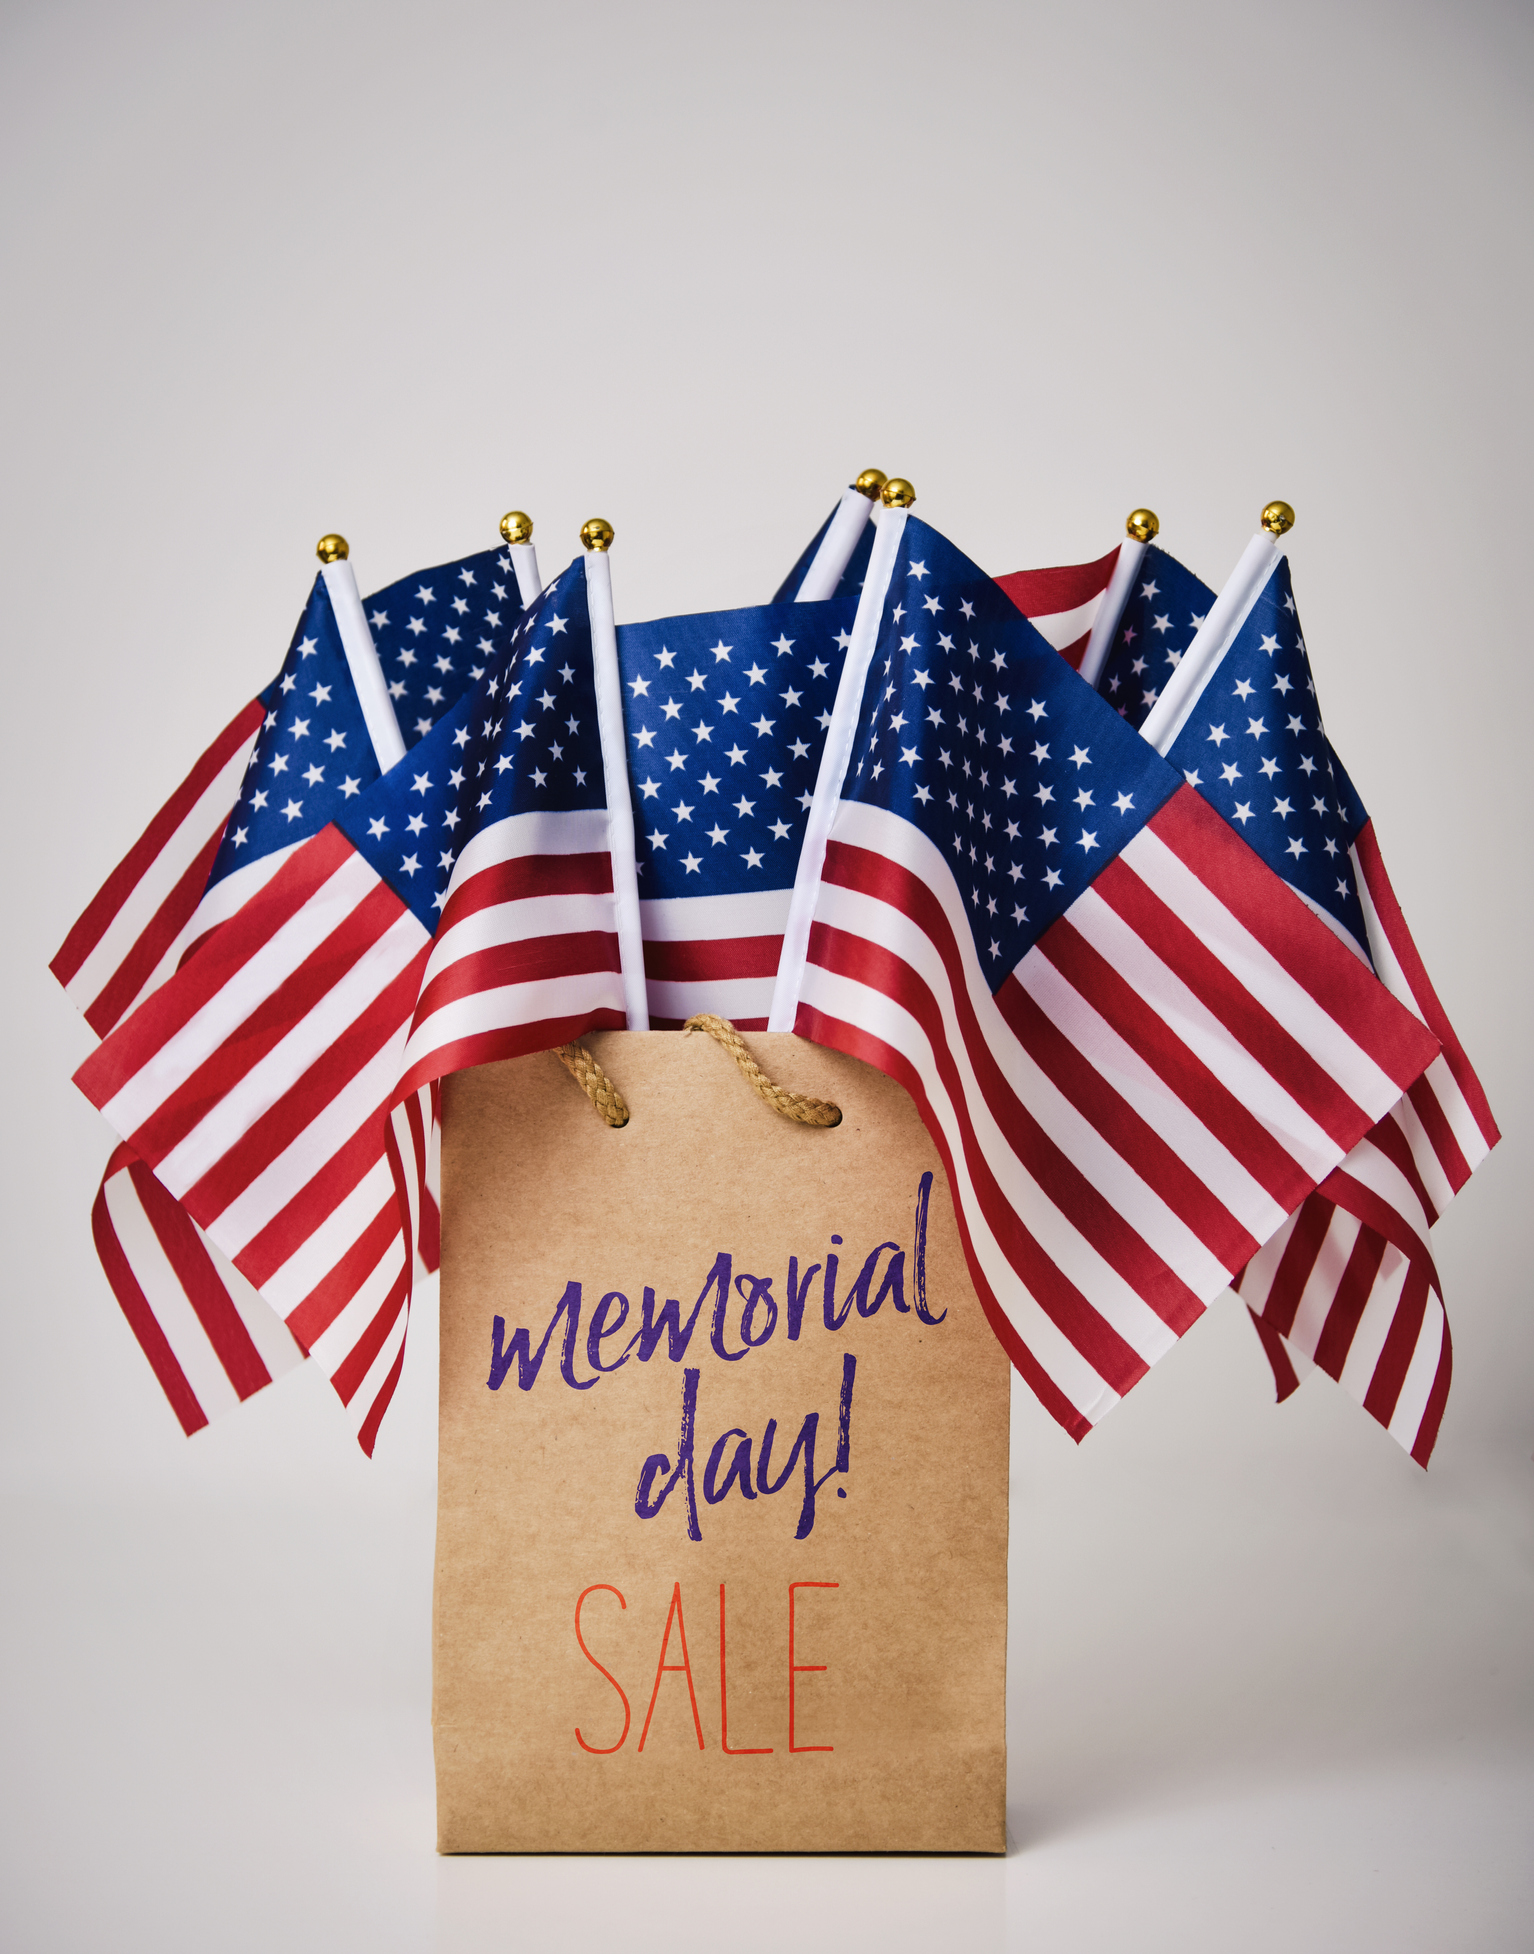 Memorial Day weekend shopping deals and duds